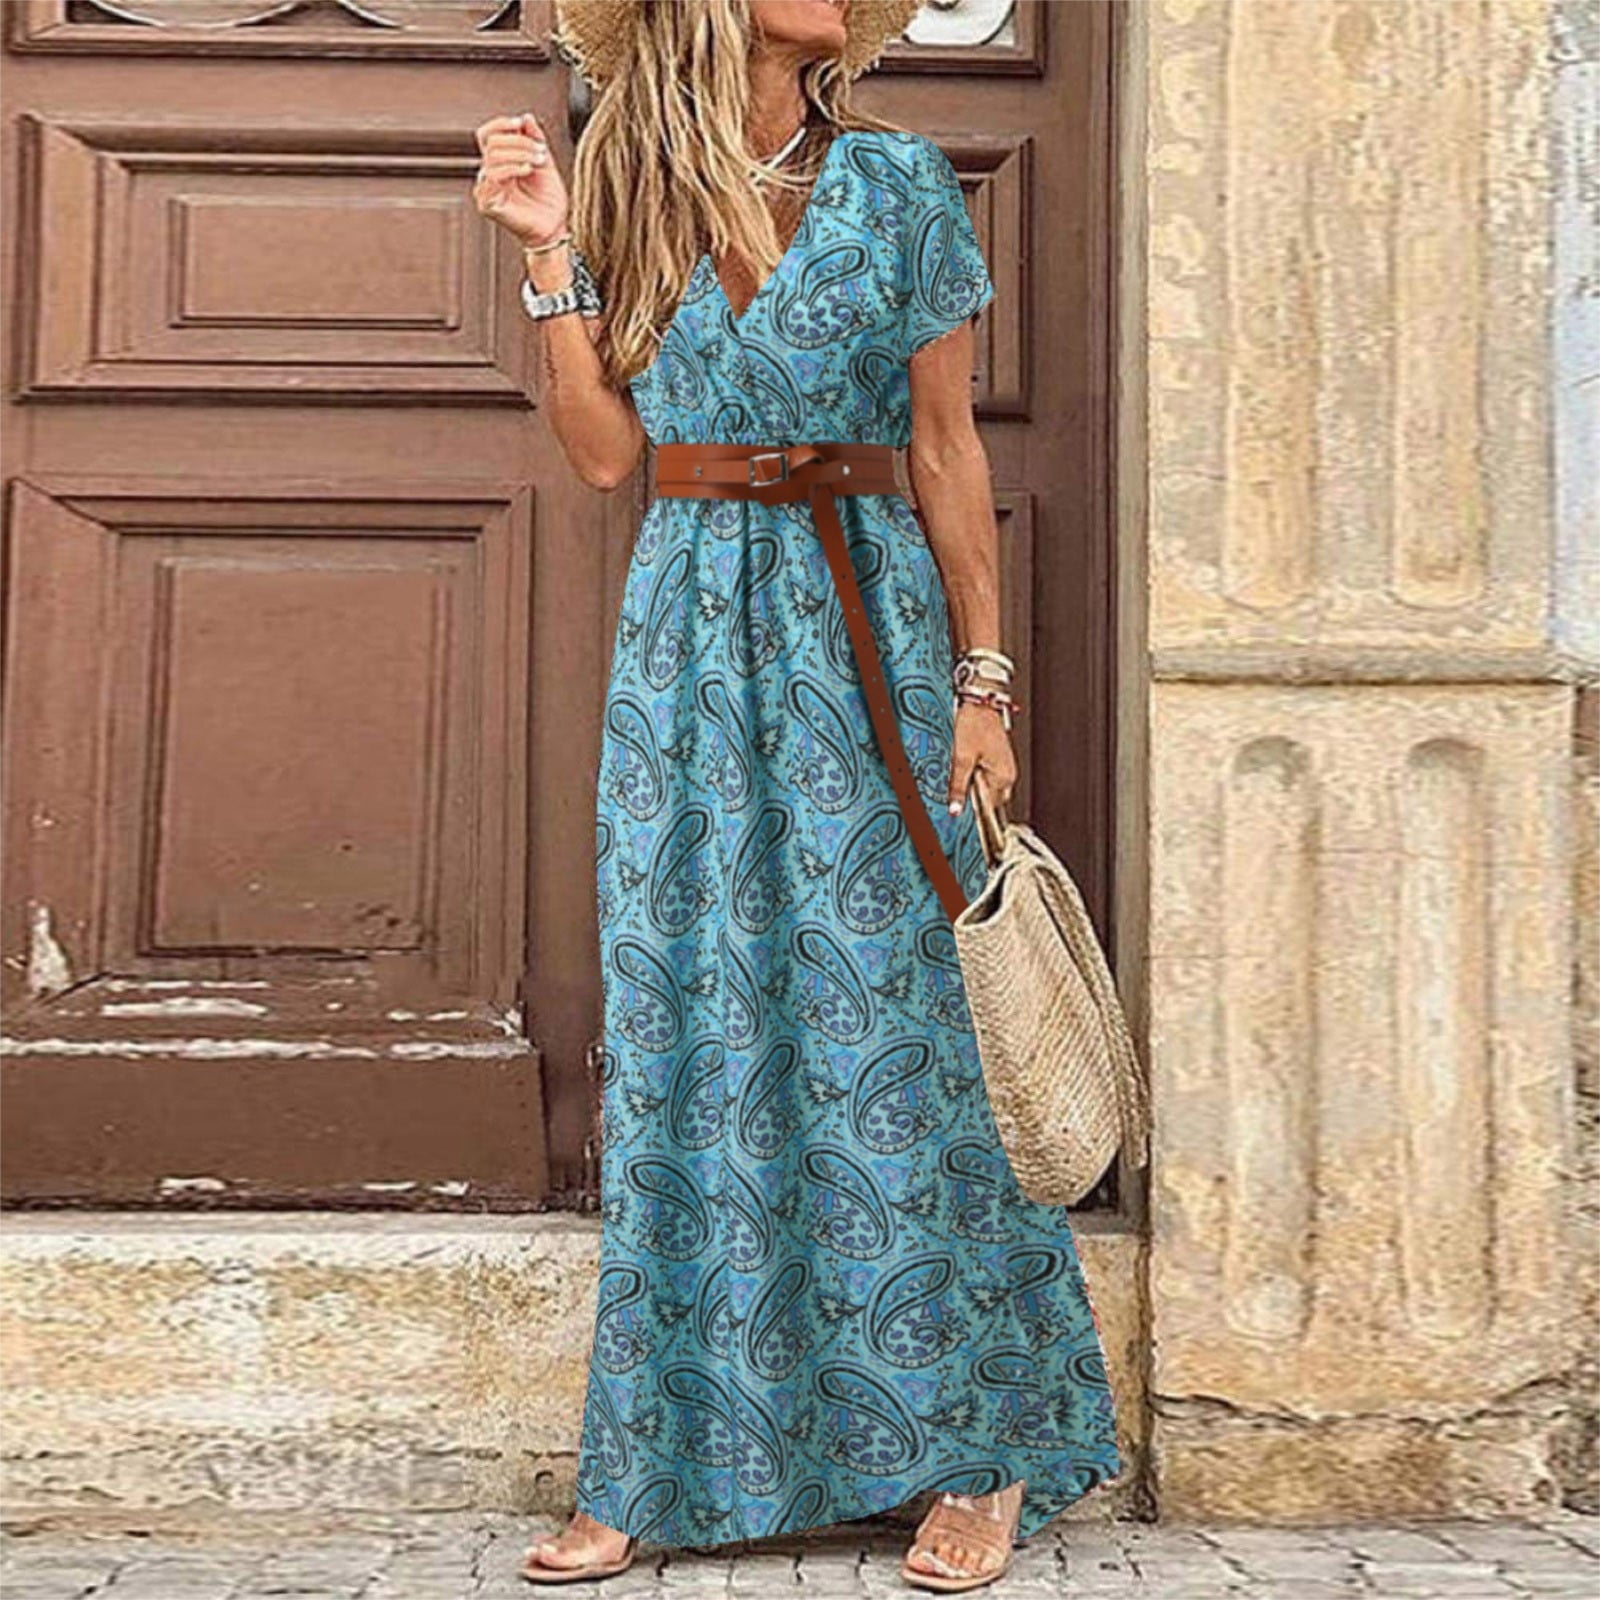 My Chic Summer Dress Picks to Wear from the Beach to Dinner (Starting at  $32.99) — The Glow Girl by Melissa Meyers